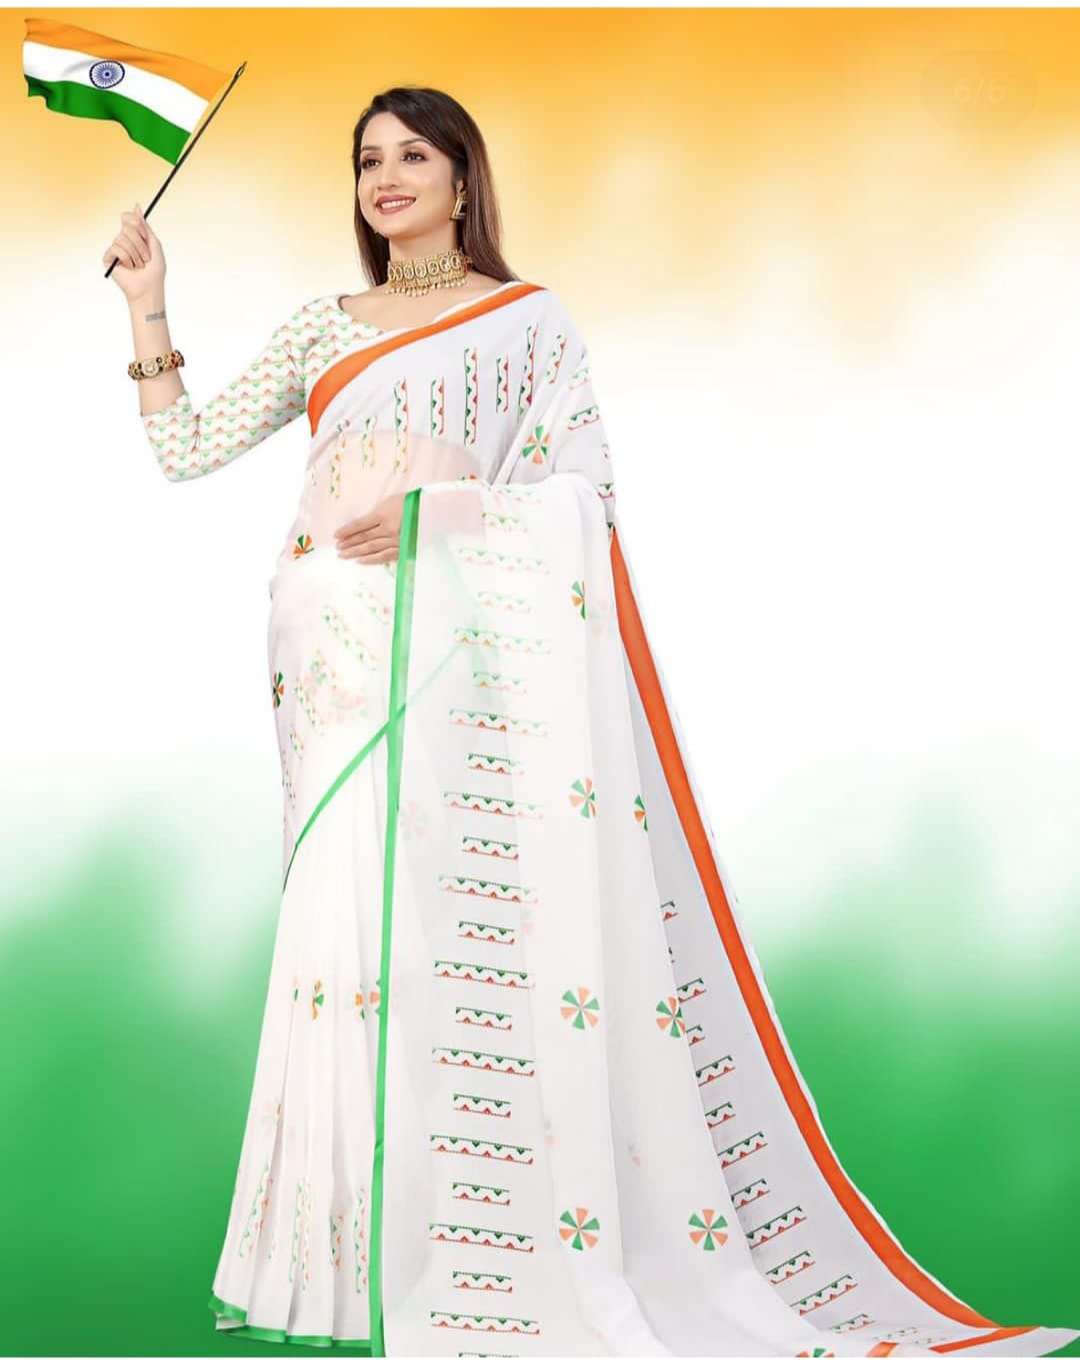 INDEPENDENCE DAY SPECIAL COTTON TRICOLOUR SAREE SUPPLIER